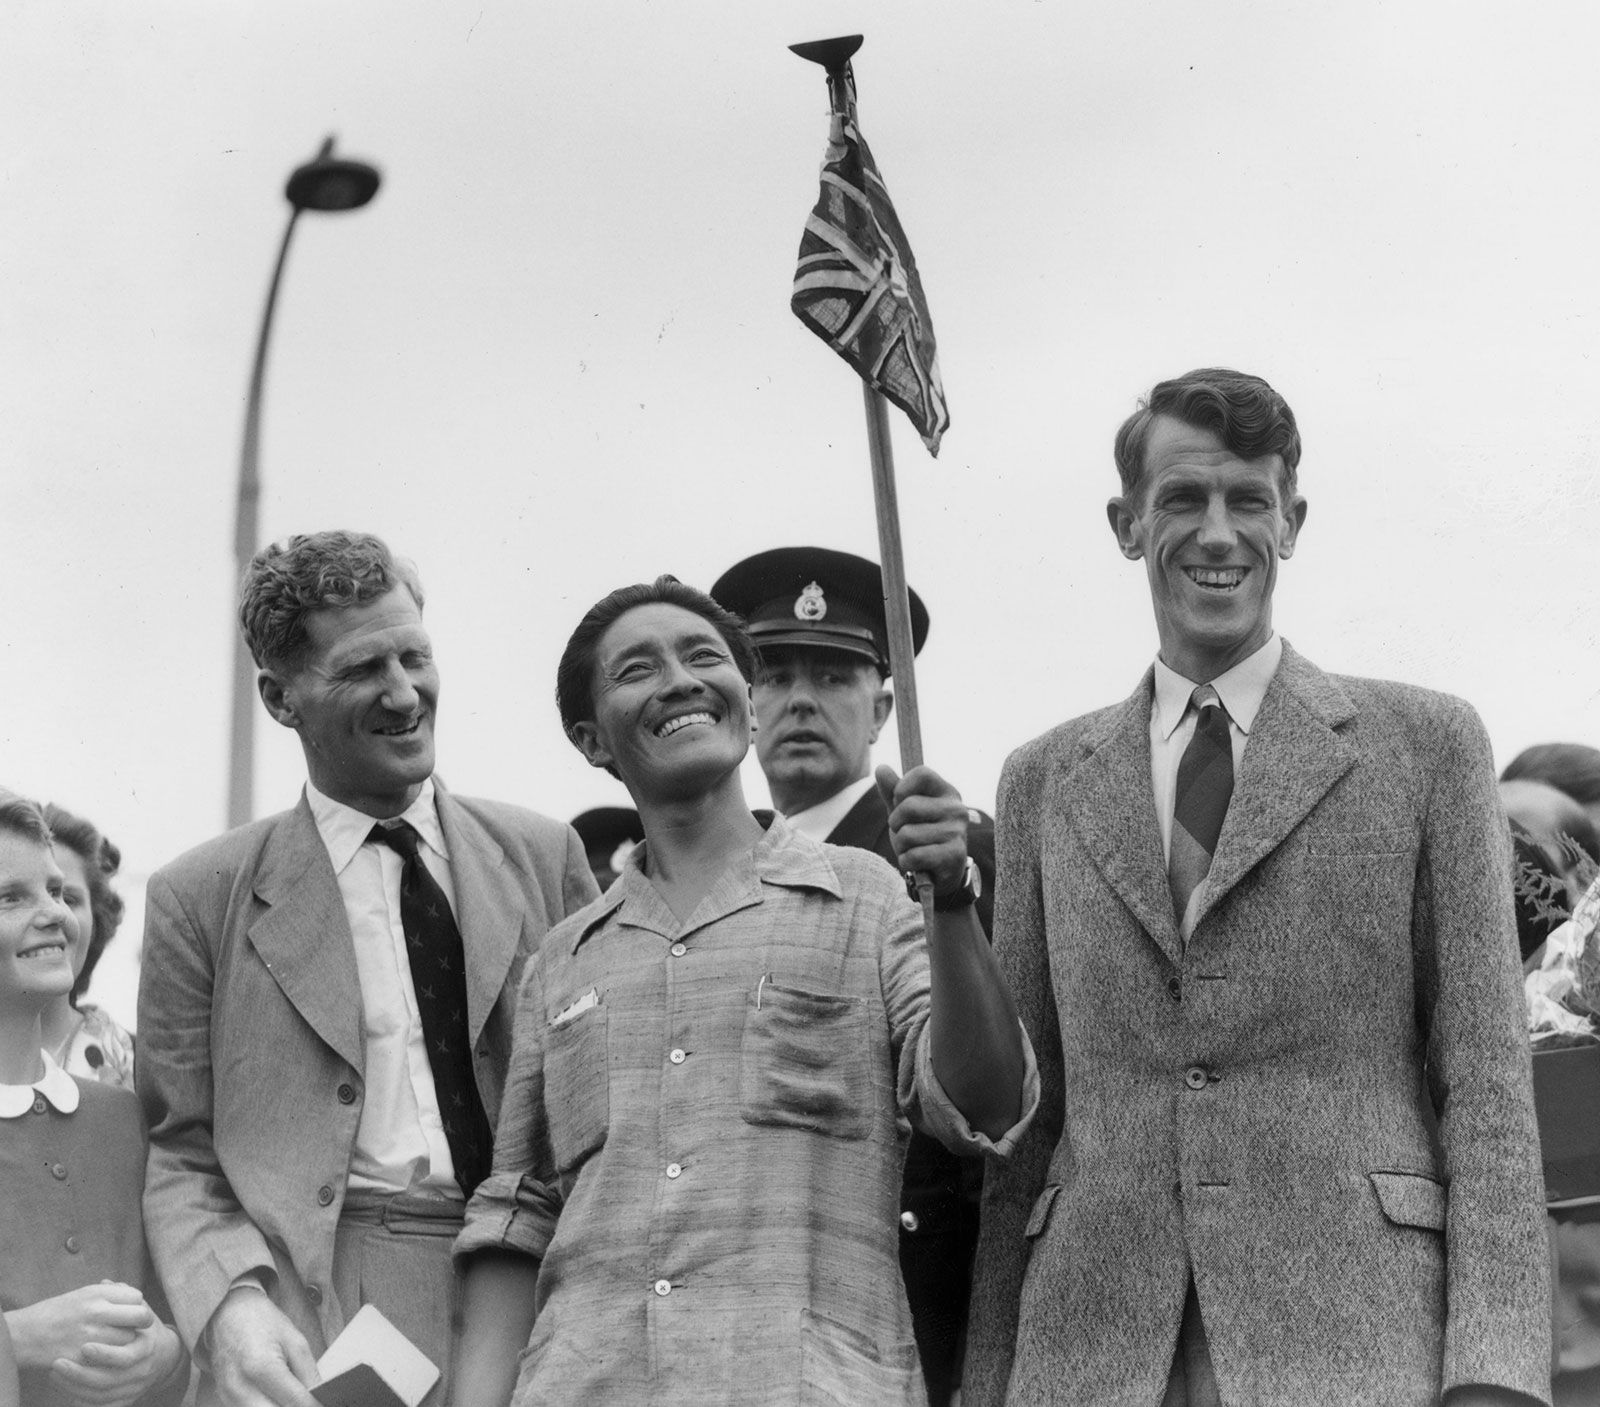 John Hunt, Tenzing Norgay, and Edmund Hillary arriving in Britain after climbing Mount Everest, 1953.